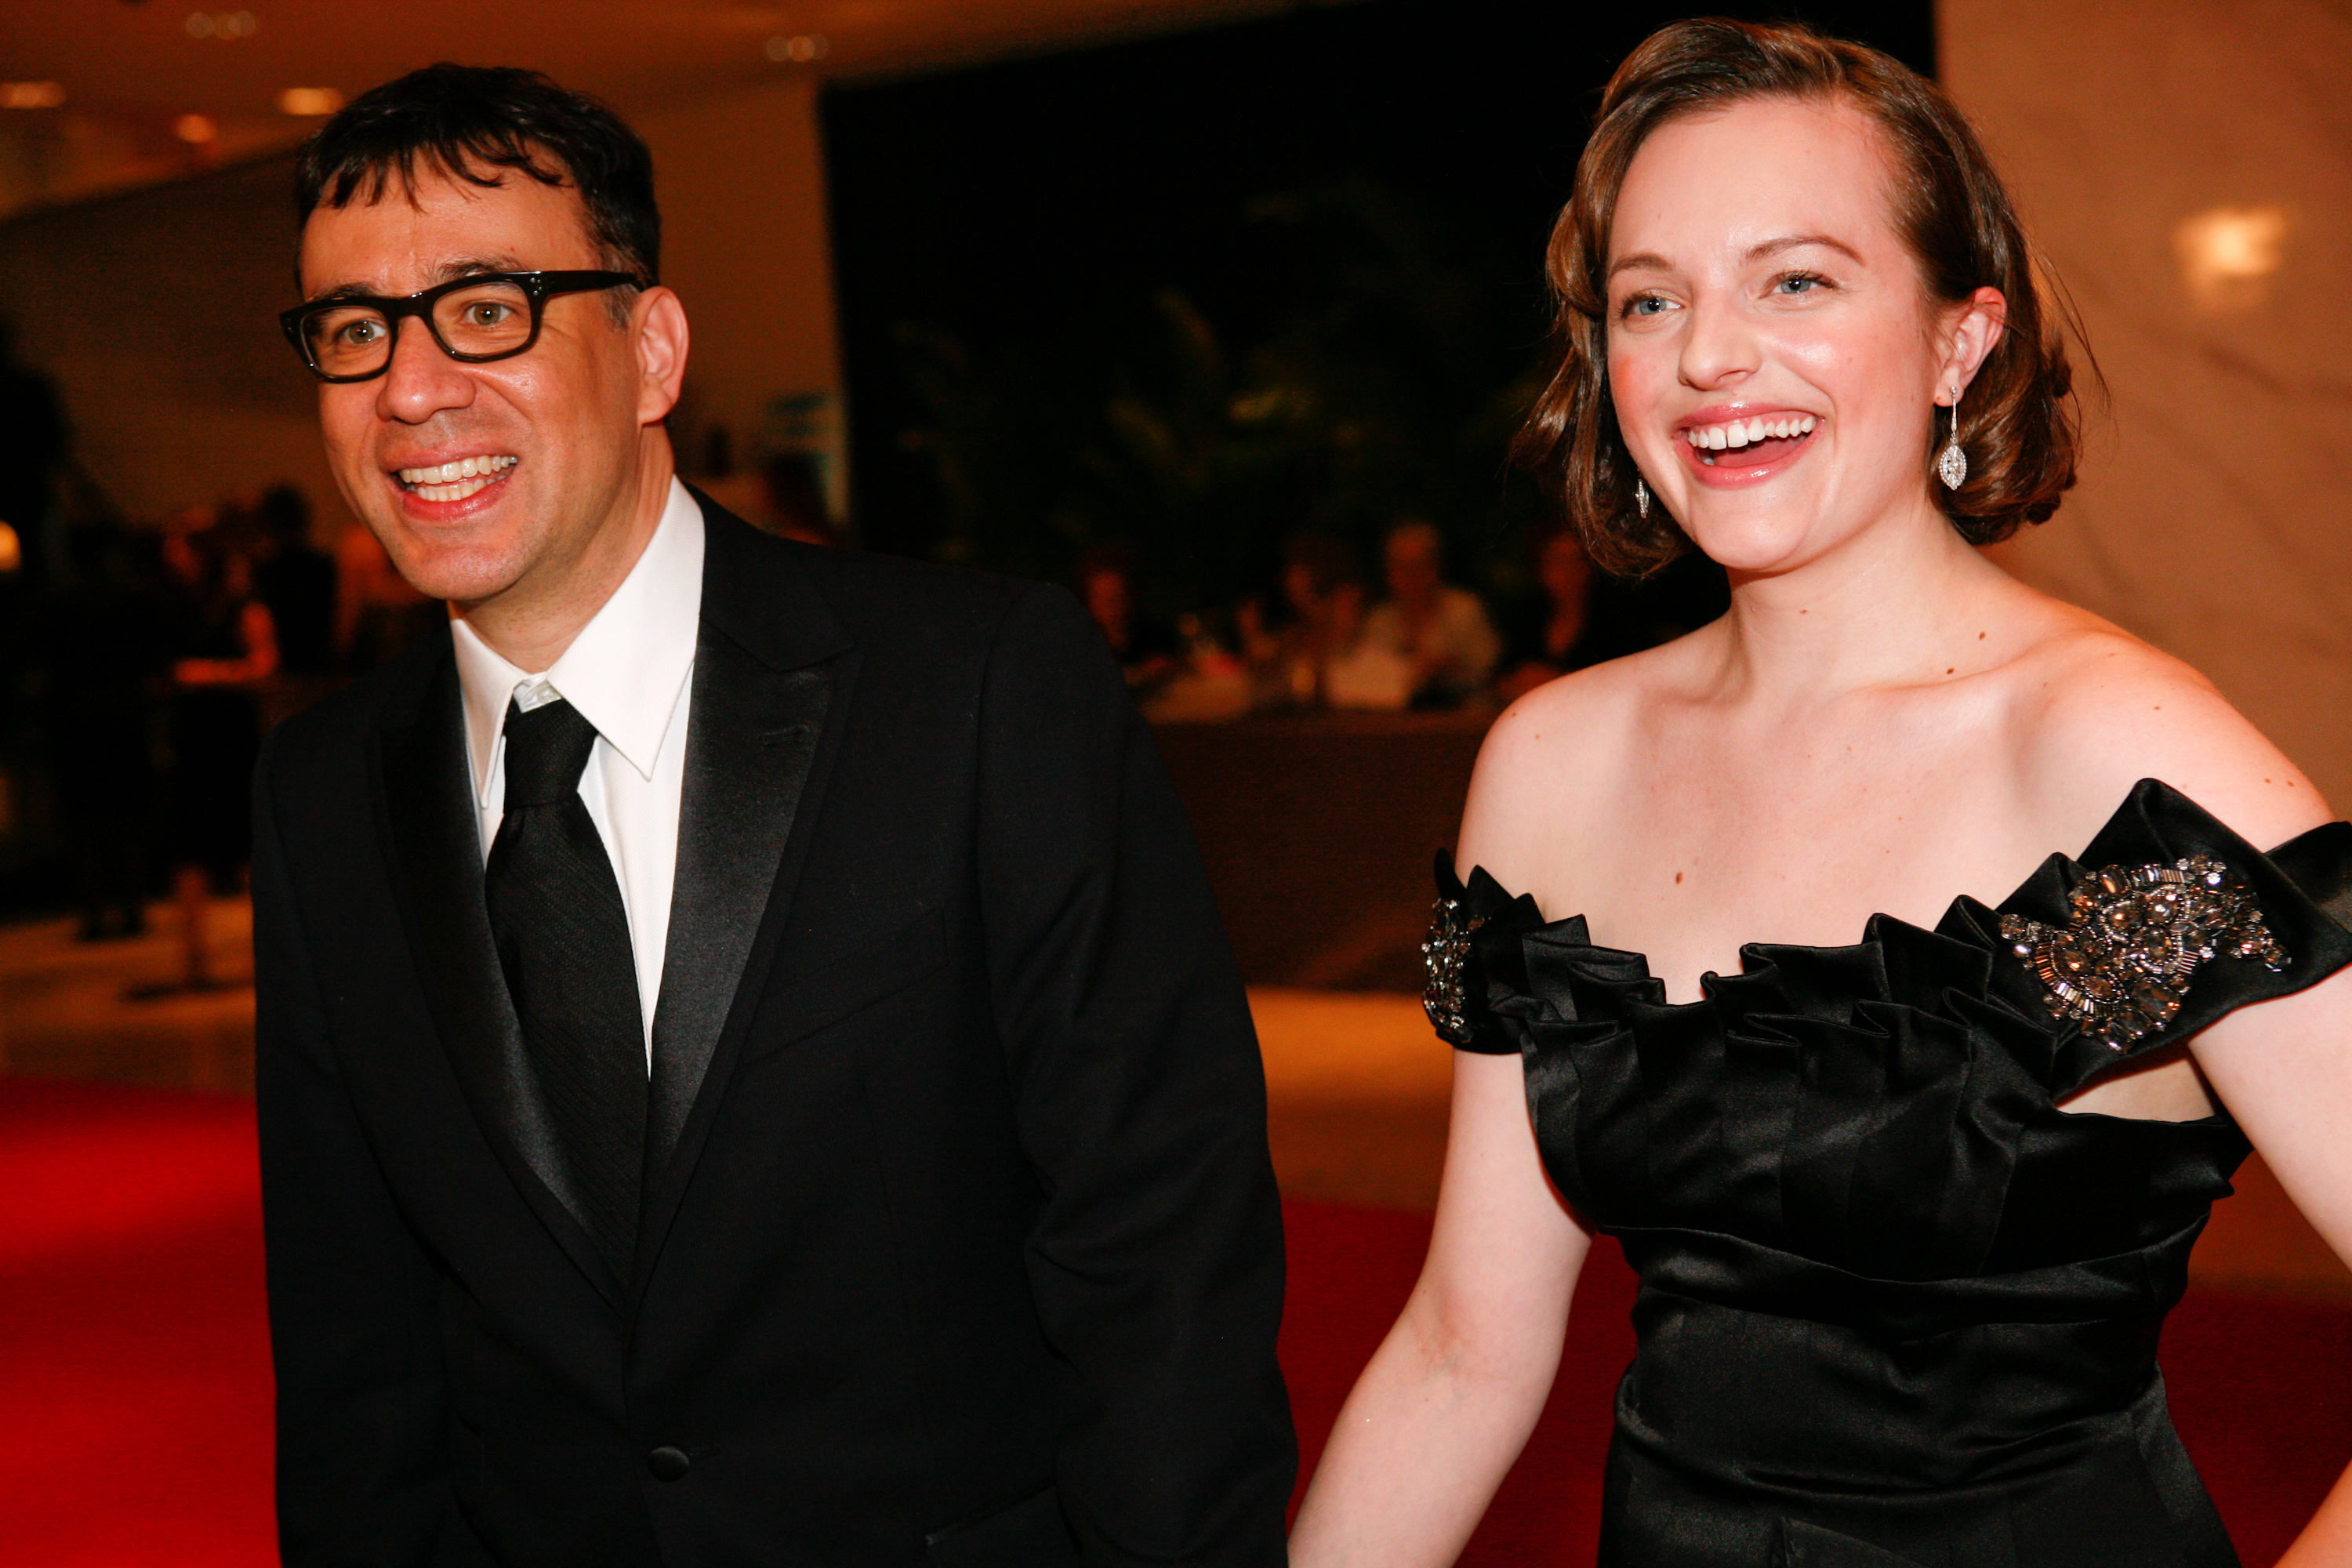 Fred Armisen and wife, actress Elisabeth Moss, at the White House Correspondents' Association dinner in 2012 | Source: Getty Images